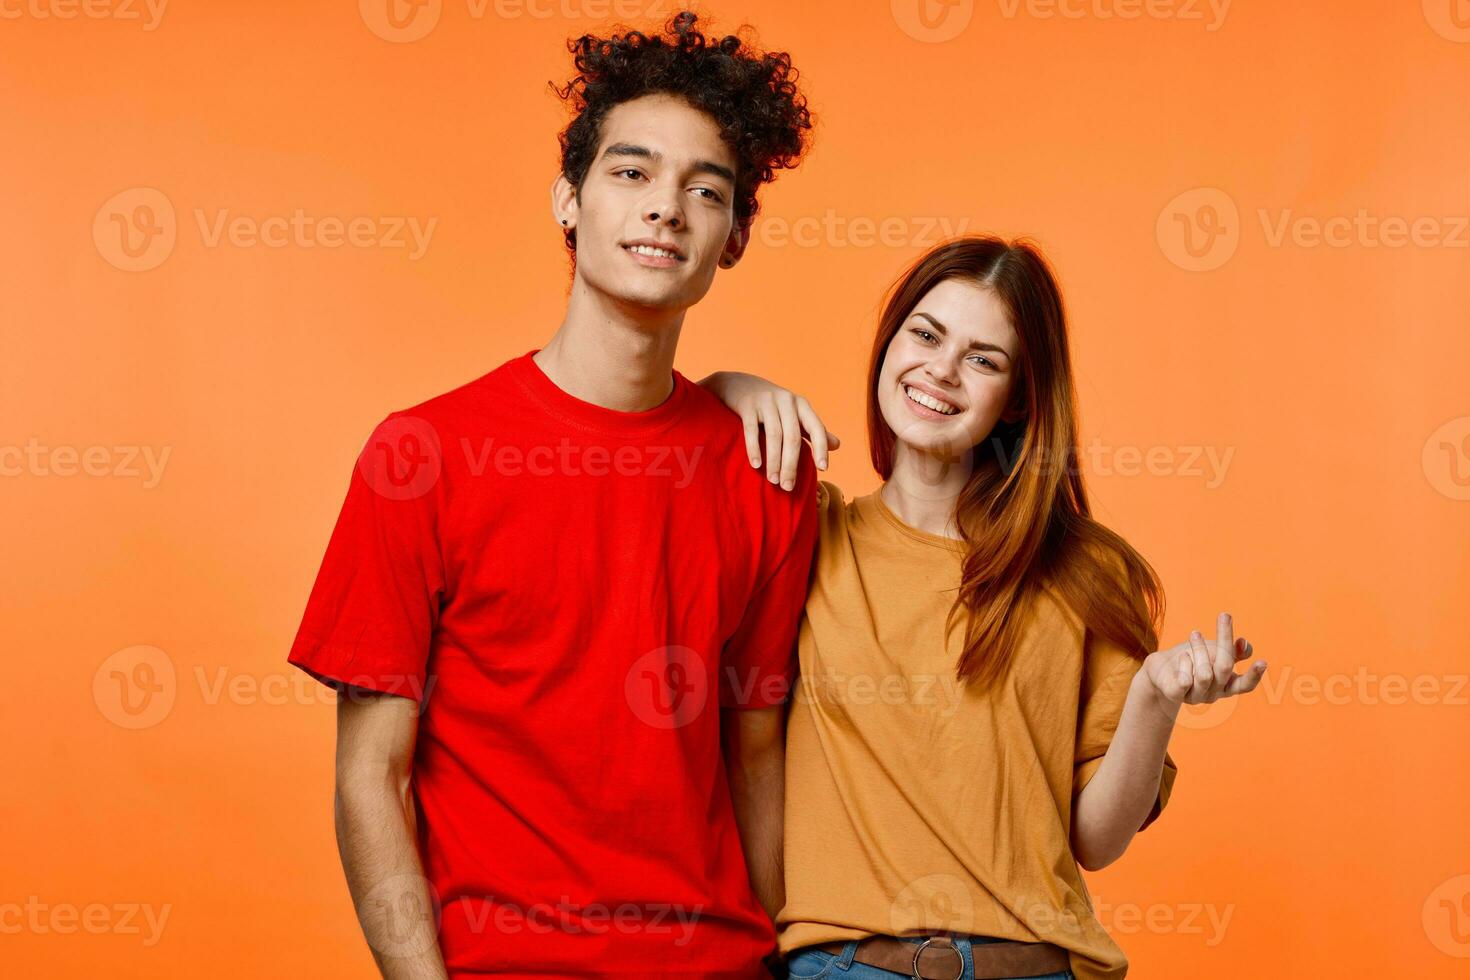 funny guy and girl in multicolored t-shirts modern style fashion photo